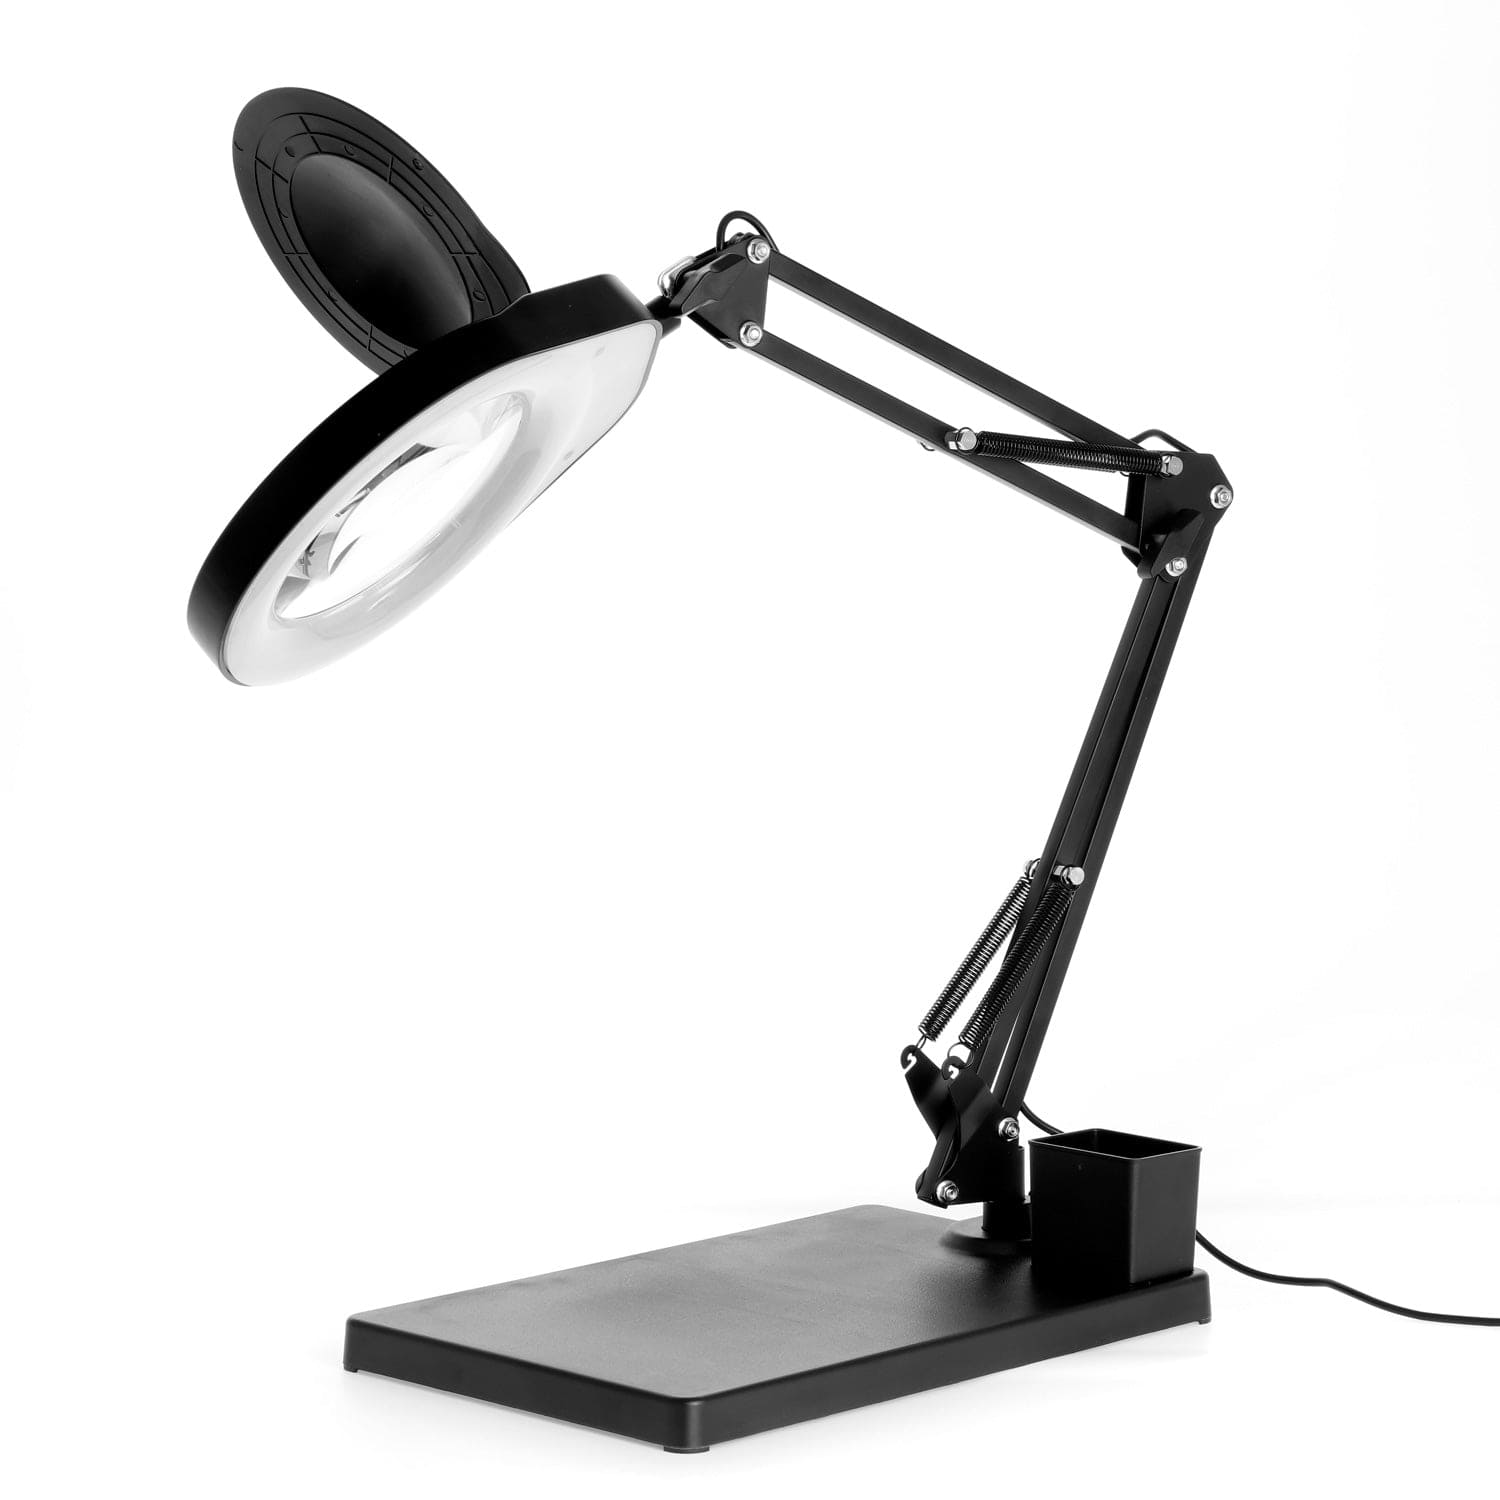 White Table Clamp Optical Lens Beauty LED Magnifier Lamp - China Magnifying  Lamp, Desktop Magnifying Lamp